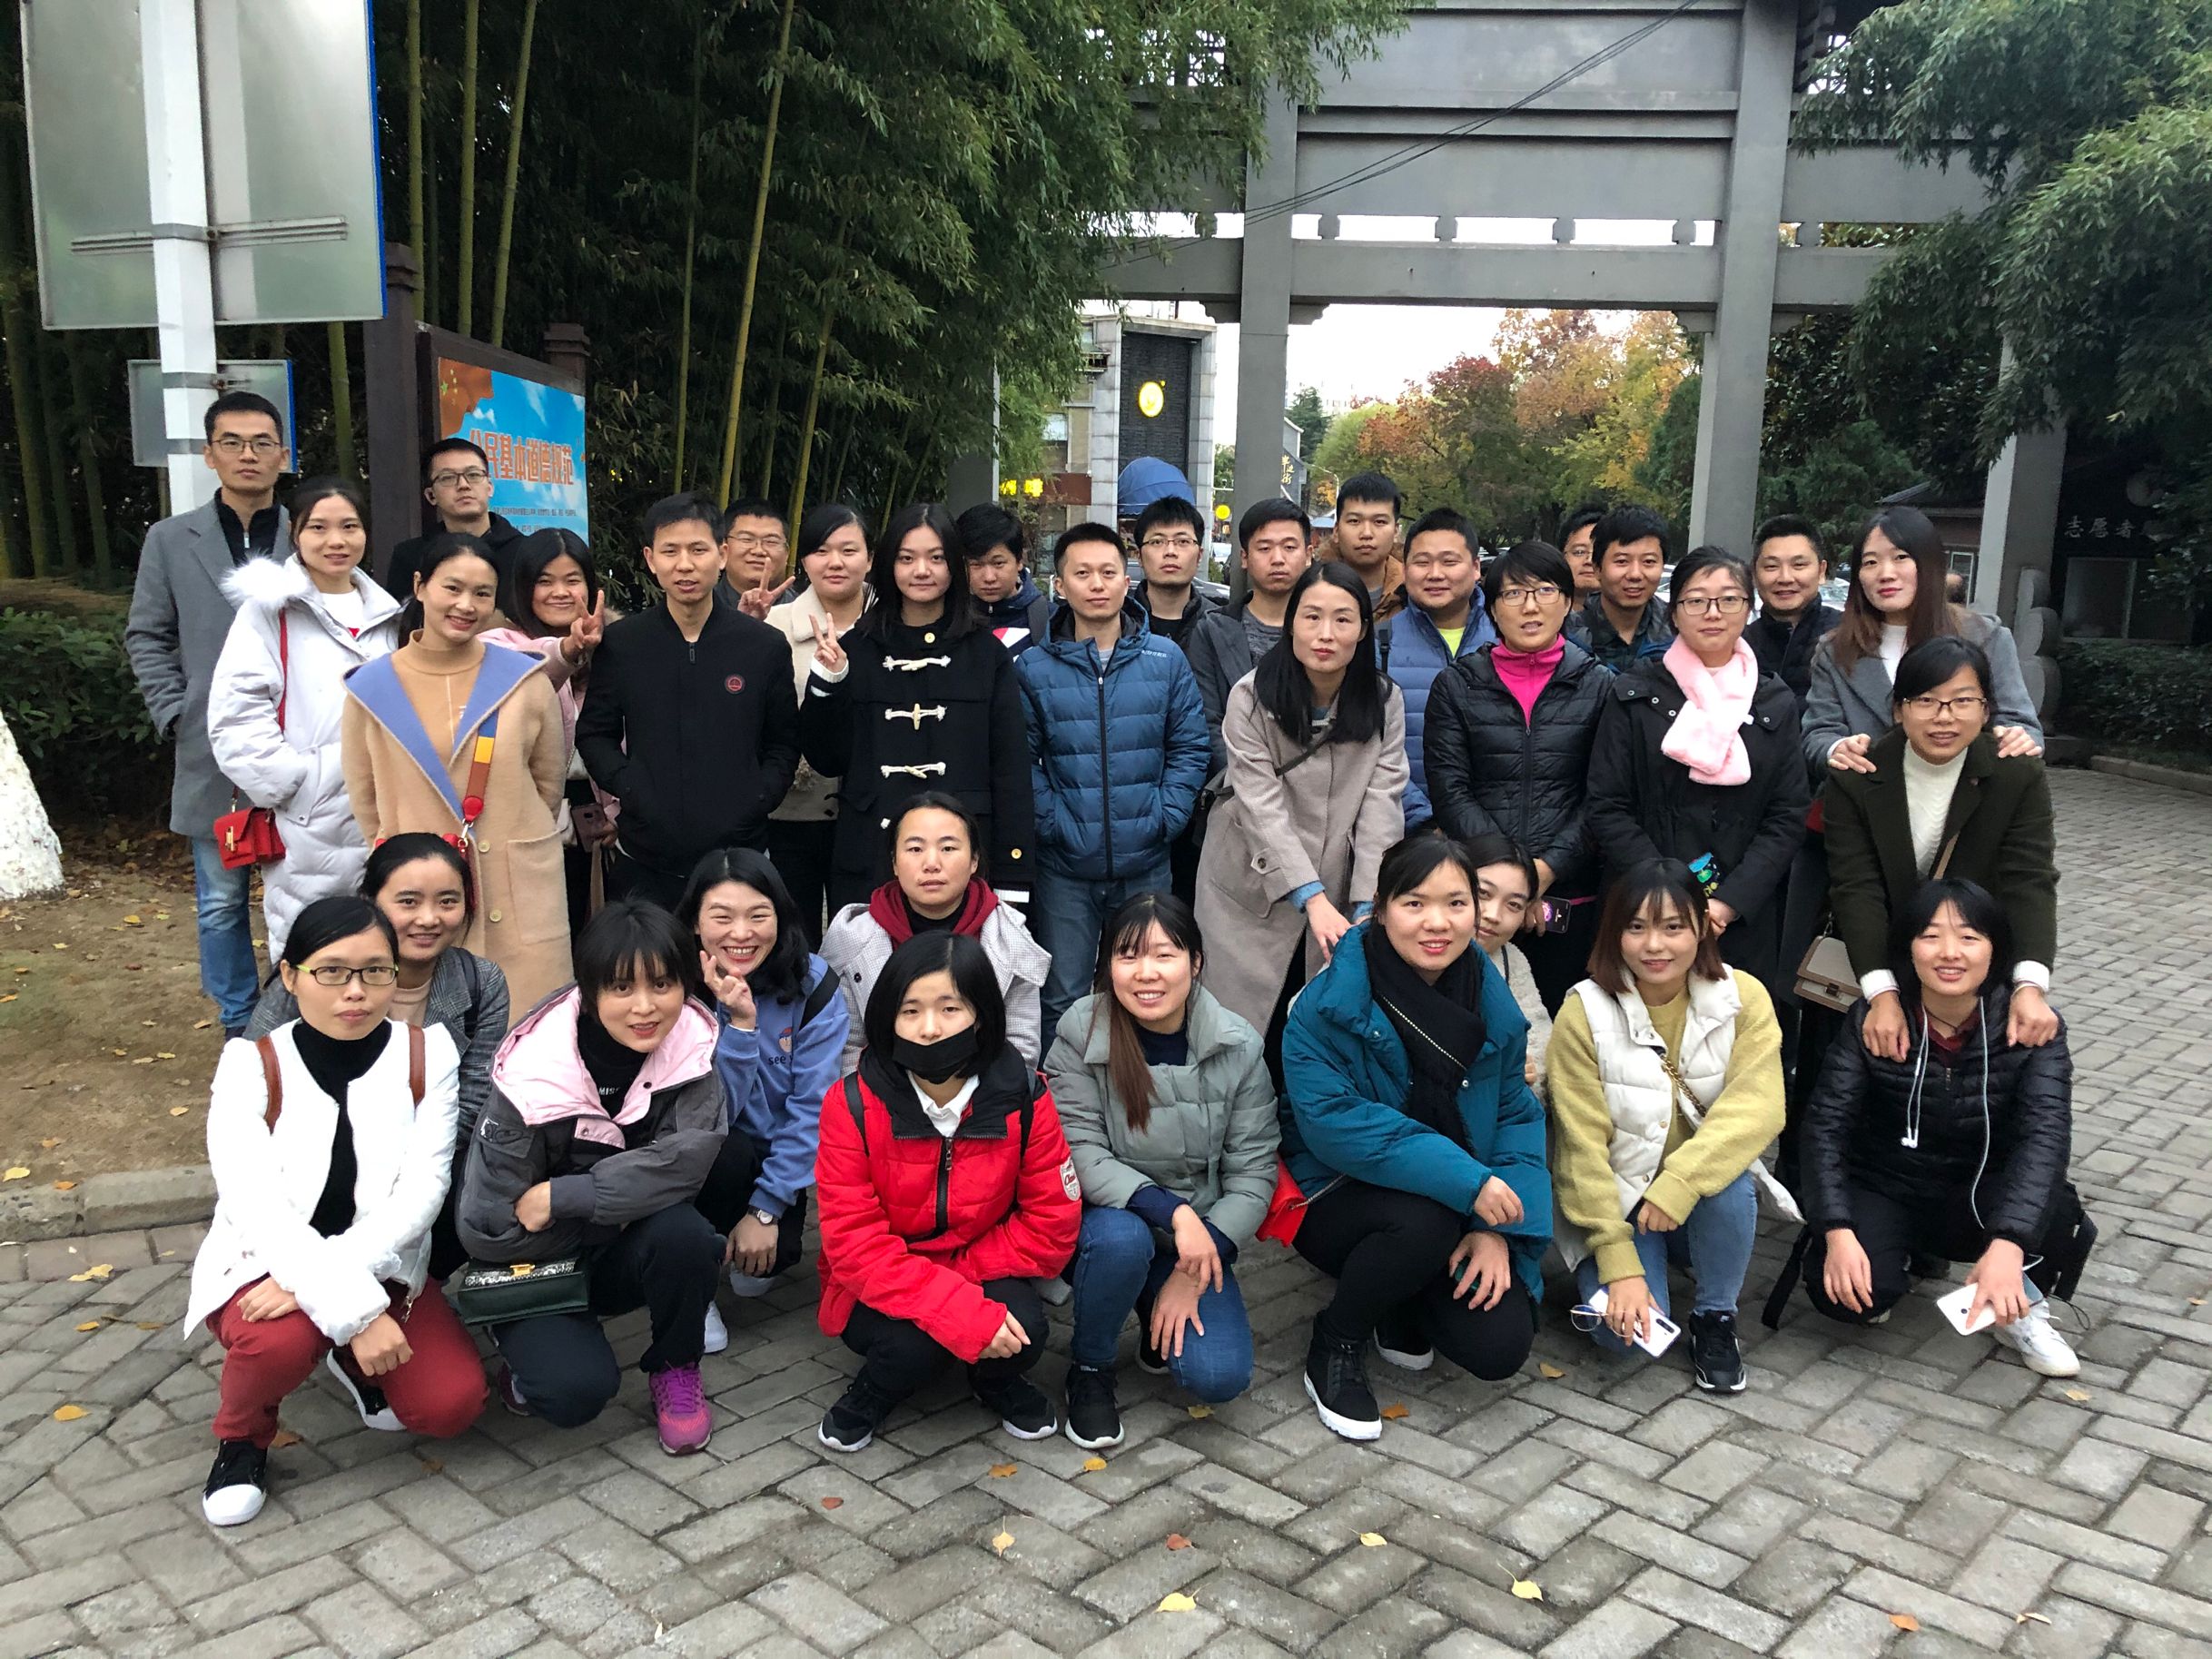 November 2019 Chip Valley Microelectronics "Climbing Dashu Mountain Team Competition"